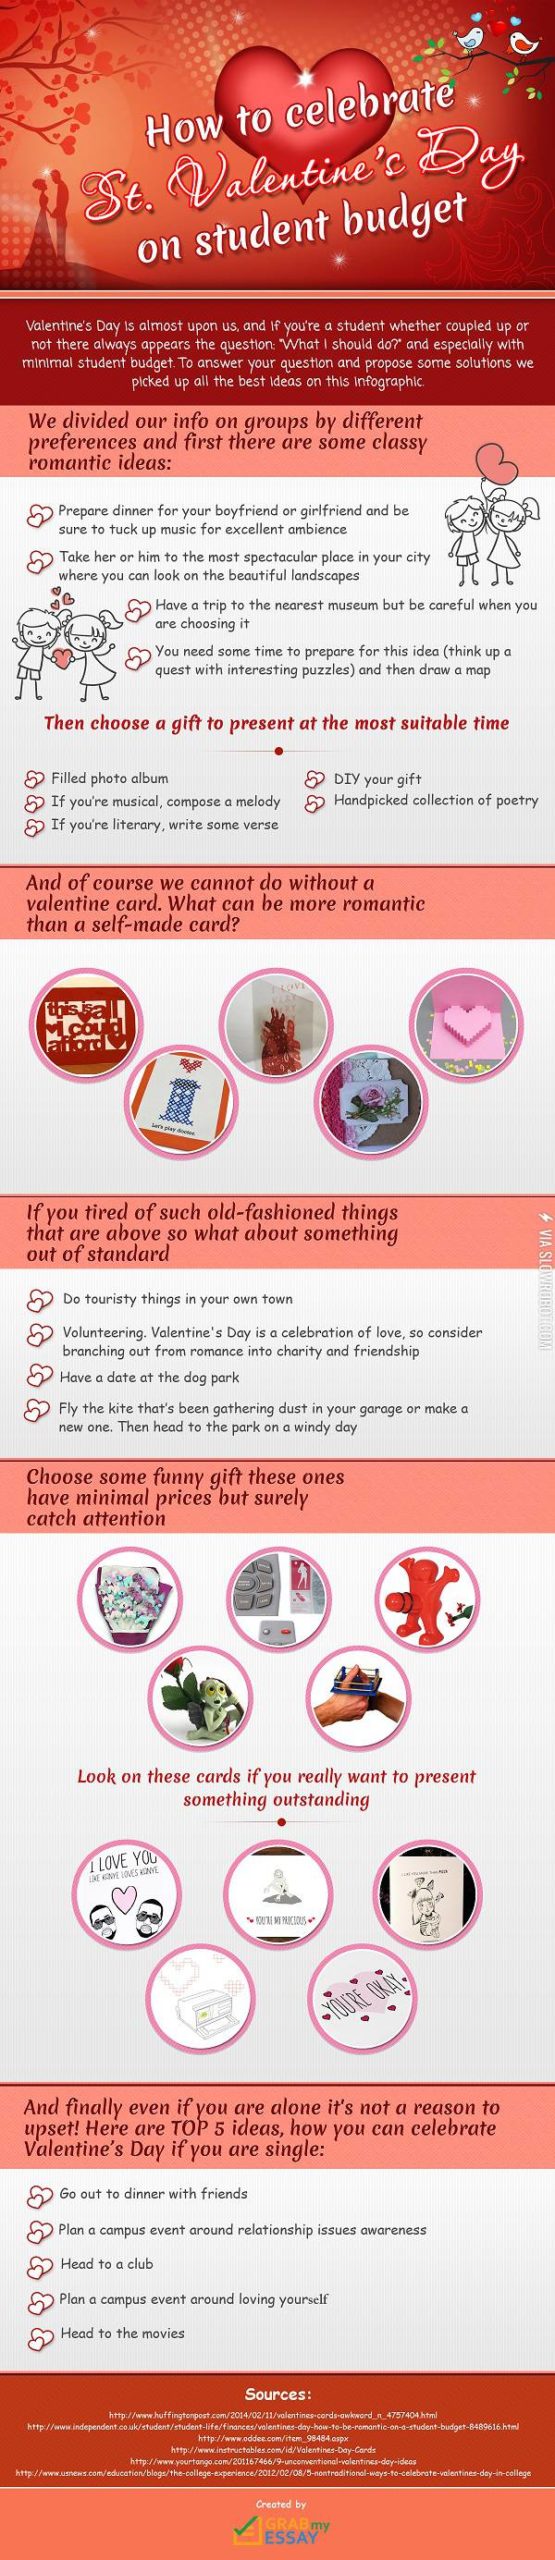 How+to+Celebrate+St.Valentine%26%238217%3Bs+Day+on+A+Student+Budget.+Infographic